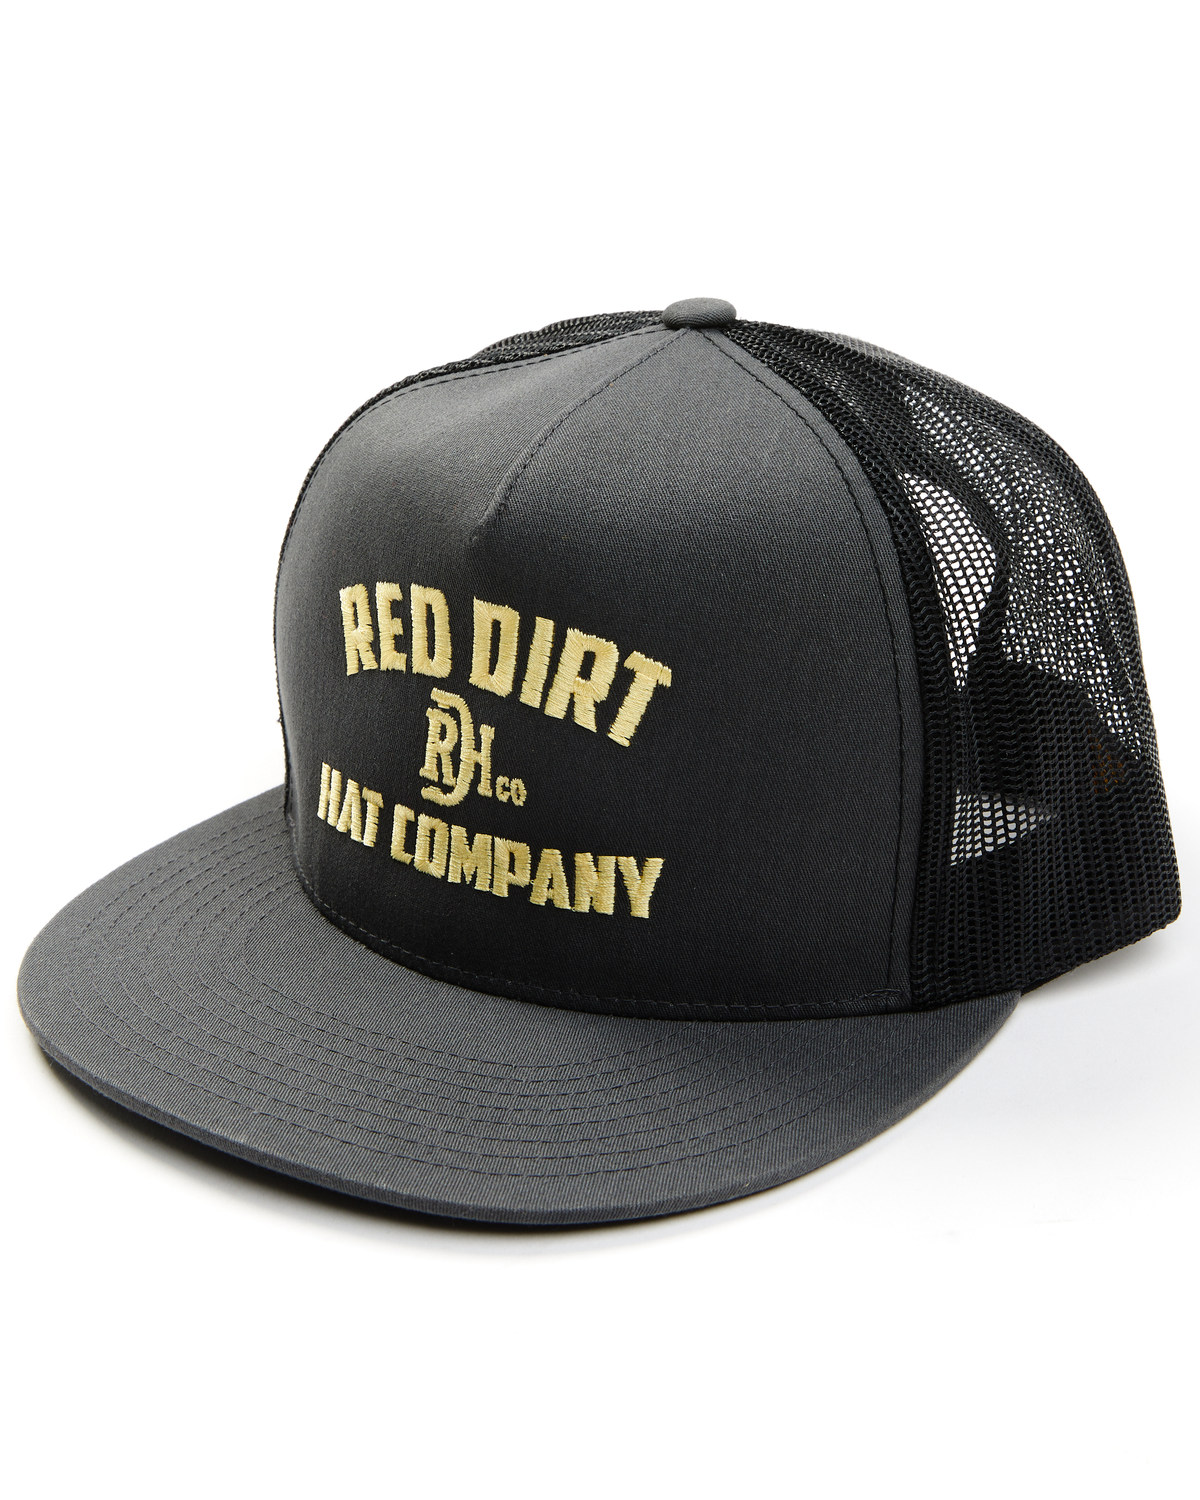 Red Dirt Hat Men's Mesh Back Direct Stitch Embroidered Letter Cap